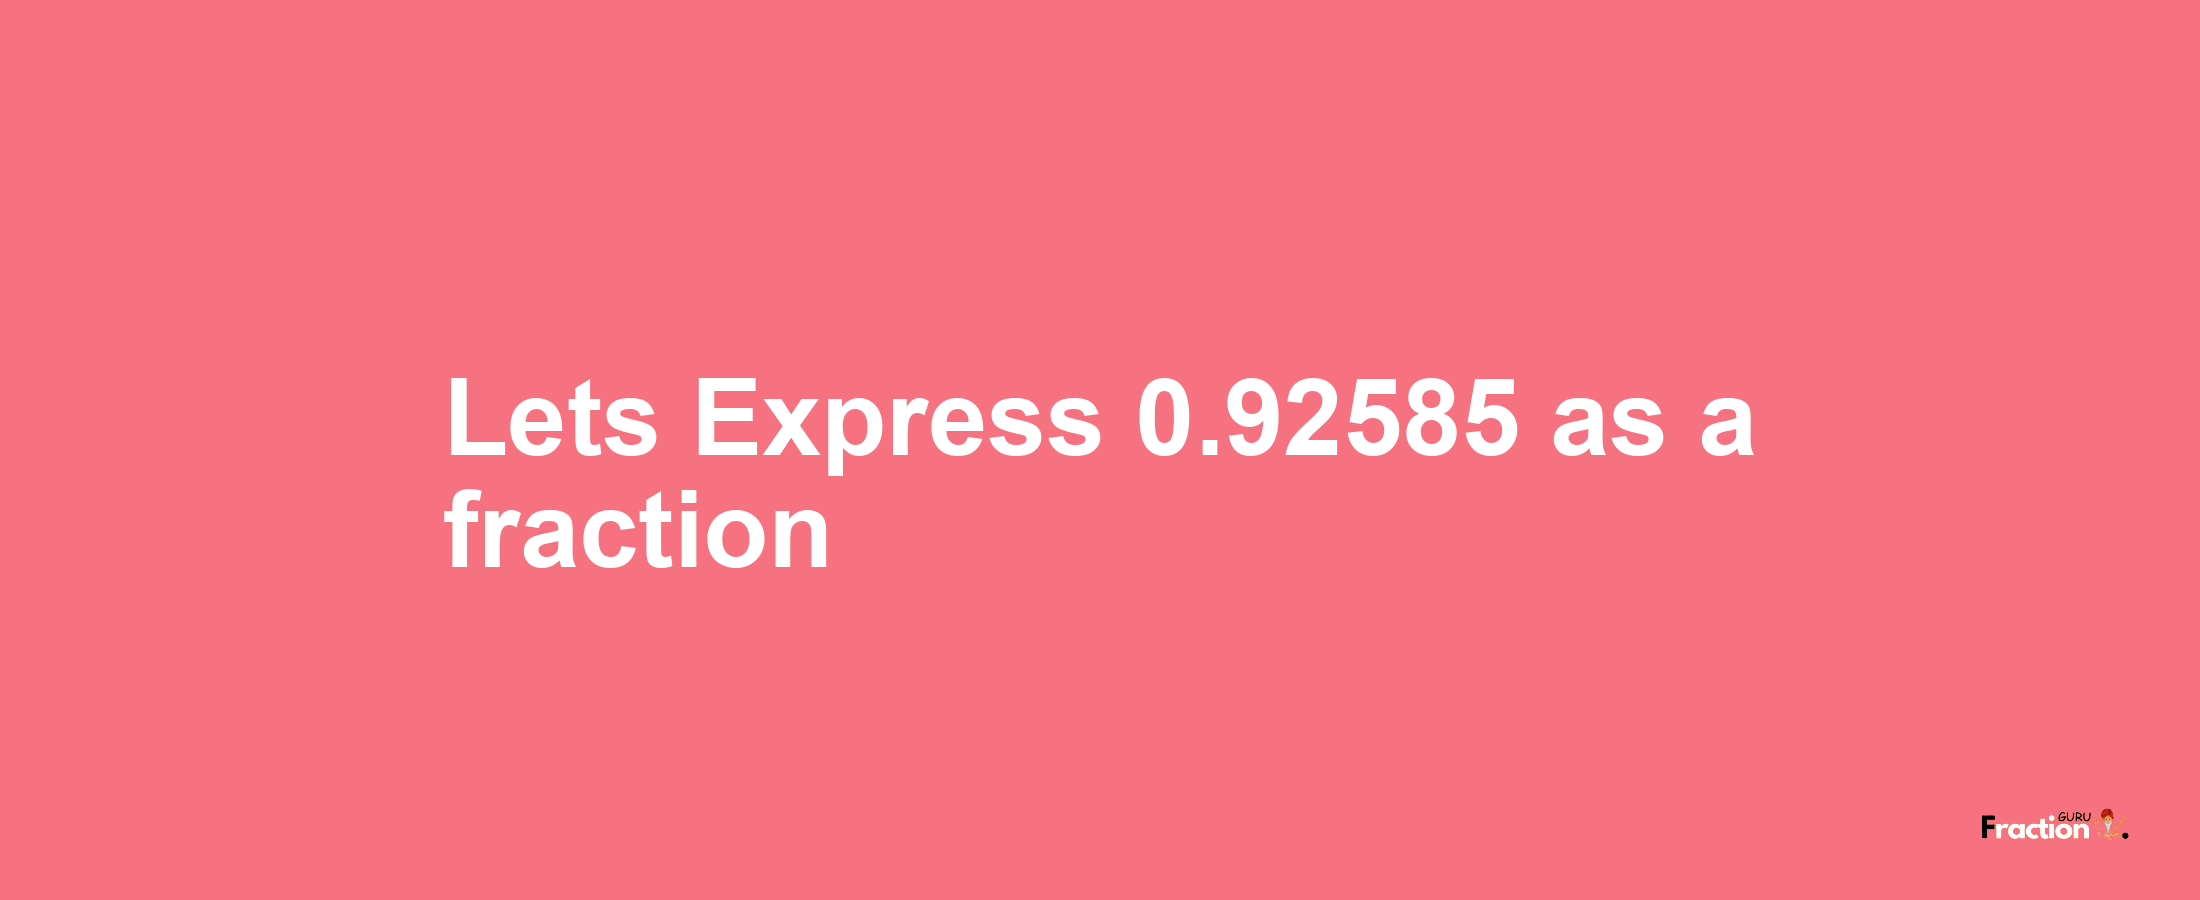 Lets Express 0.92585 as afraction